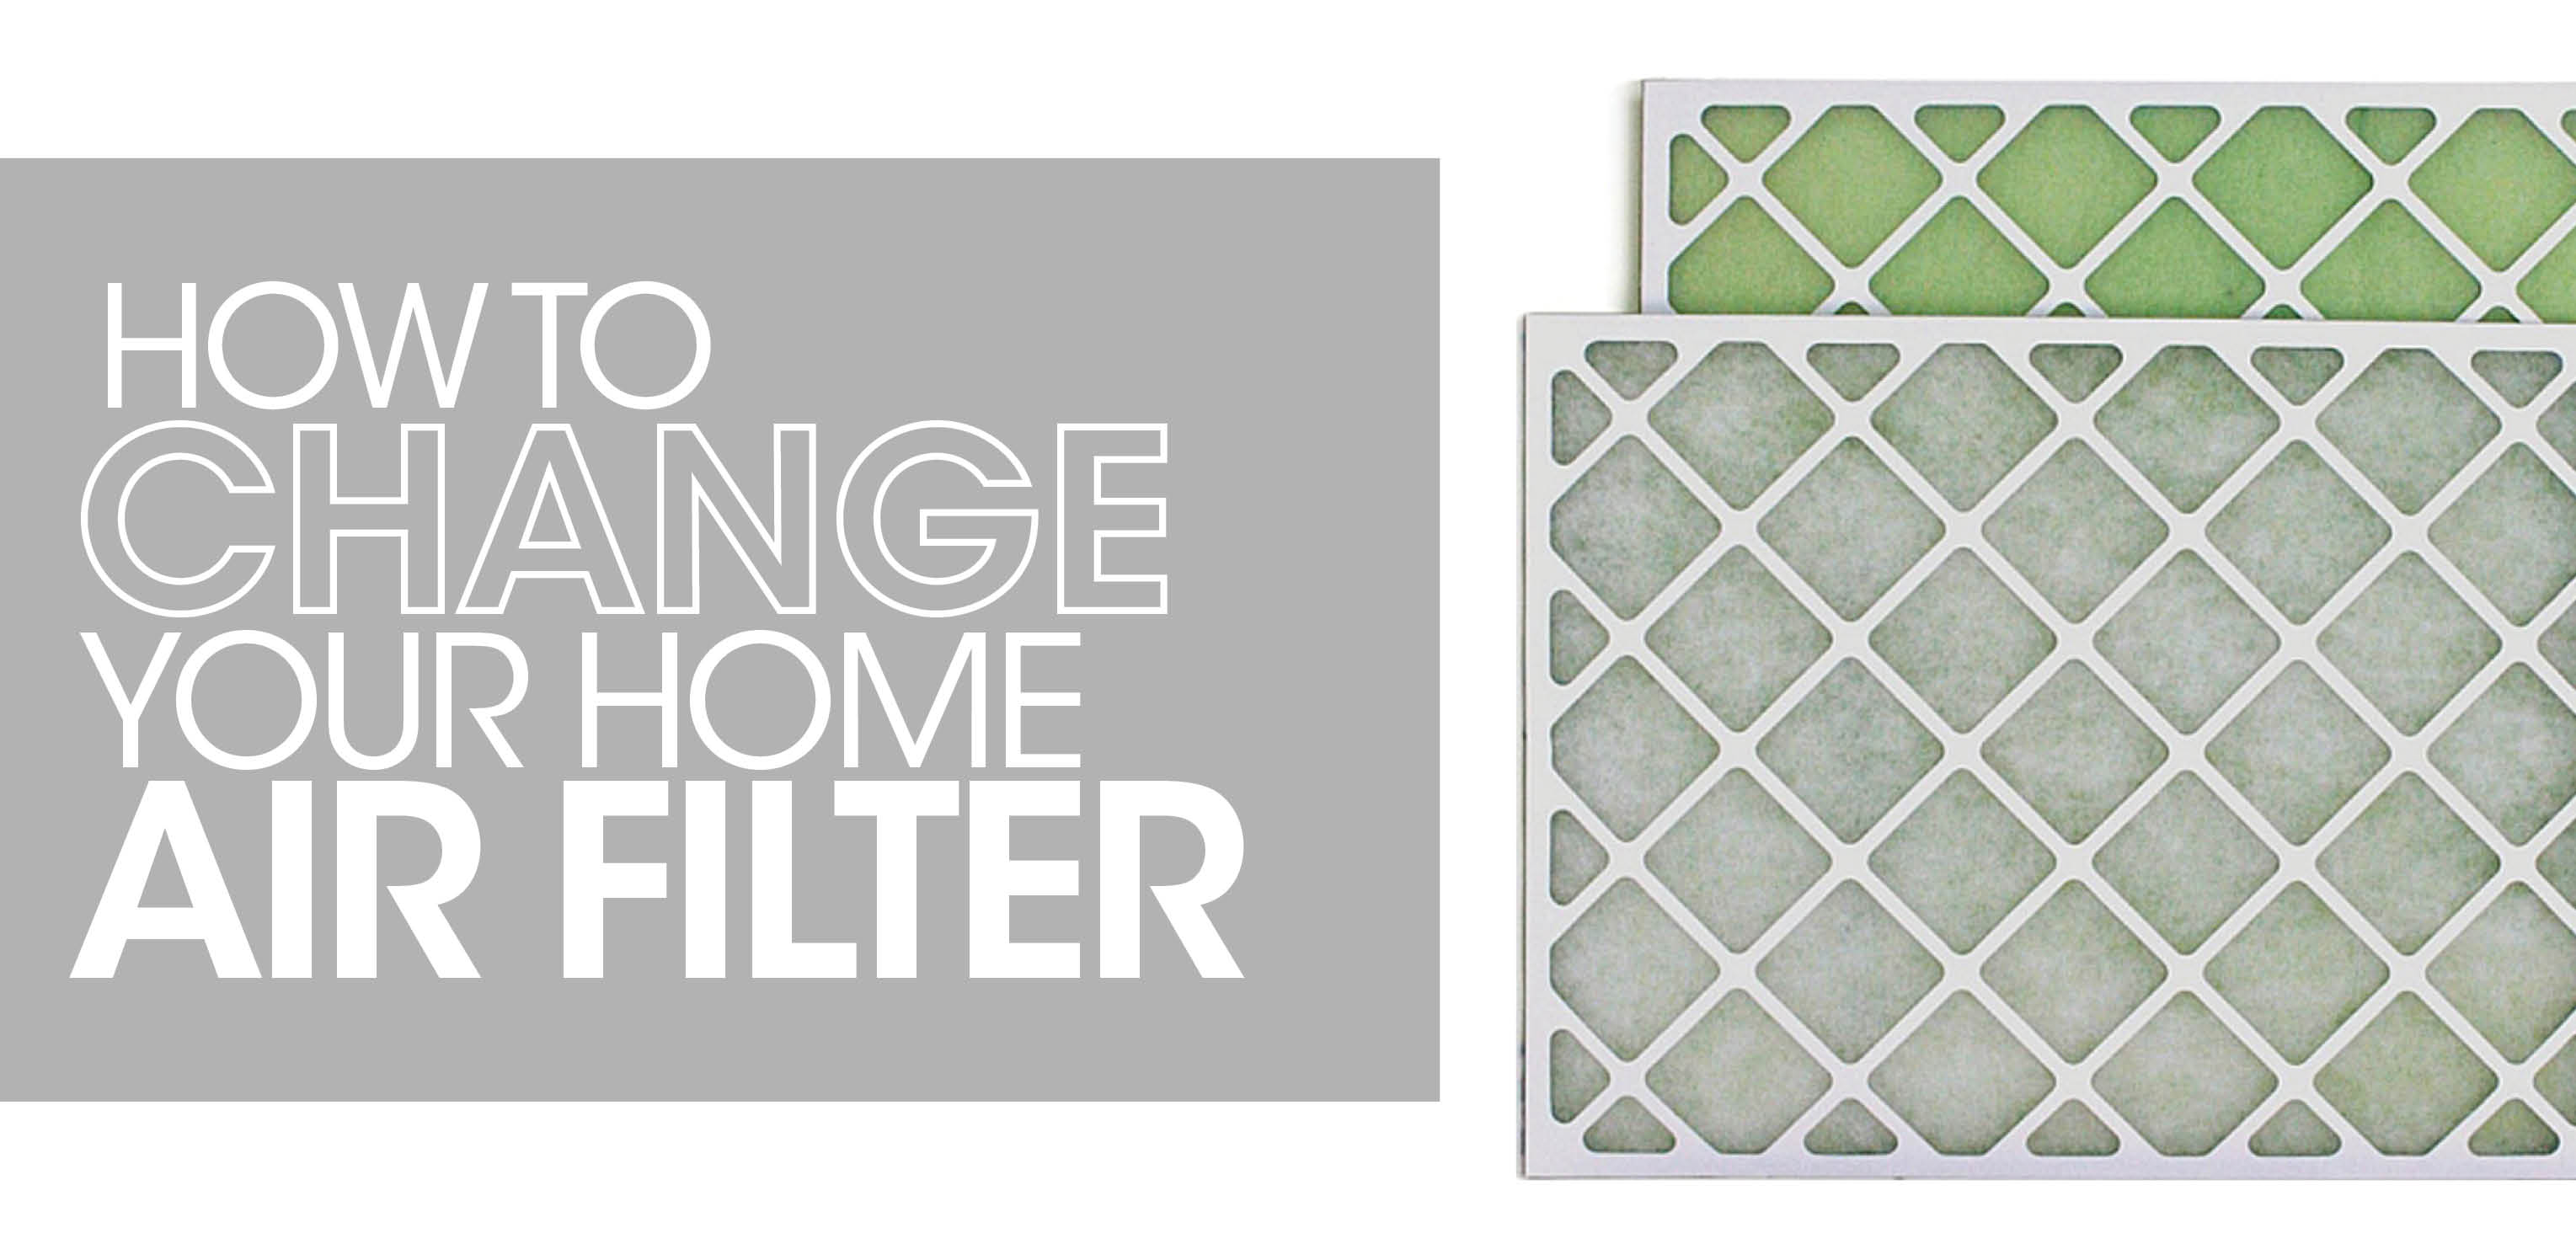 how to change your home air filter - two air filters